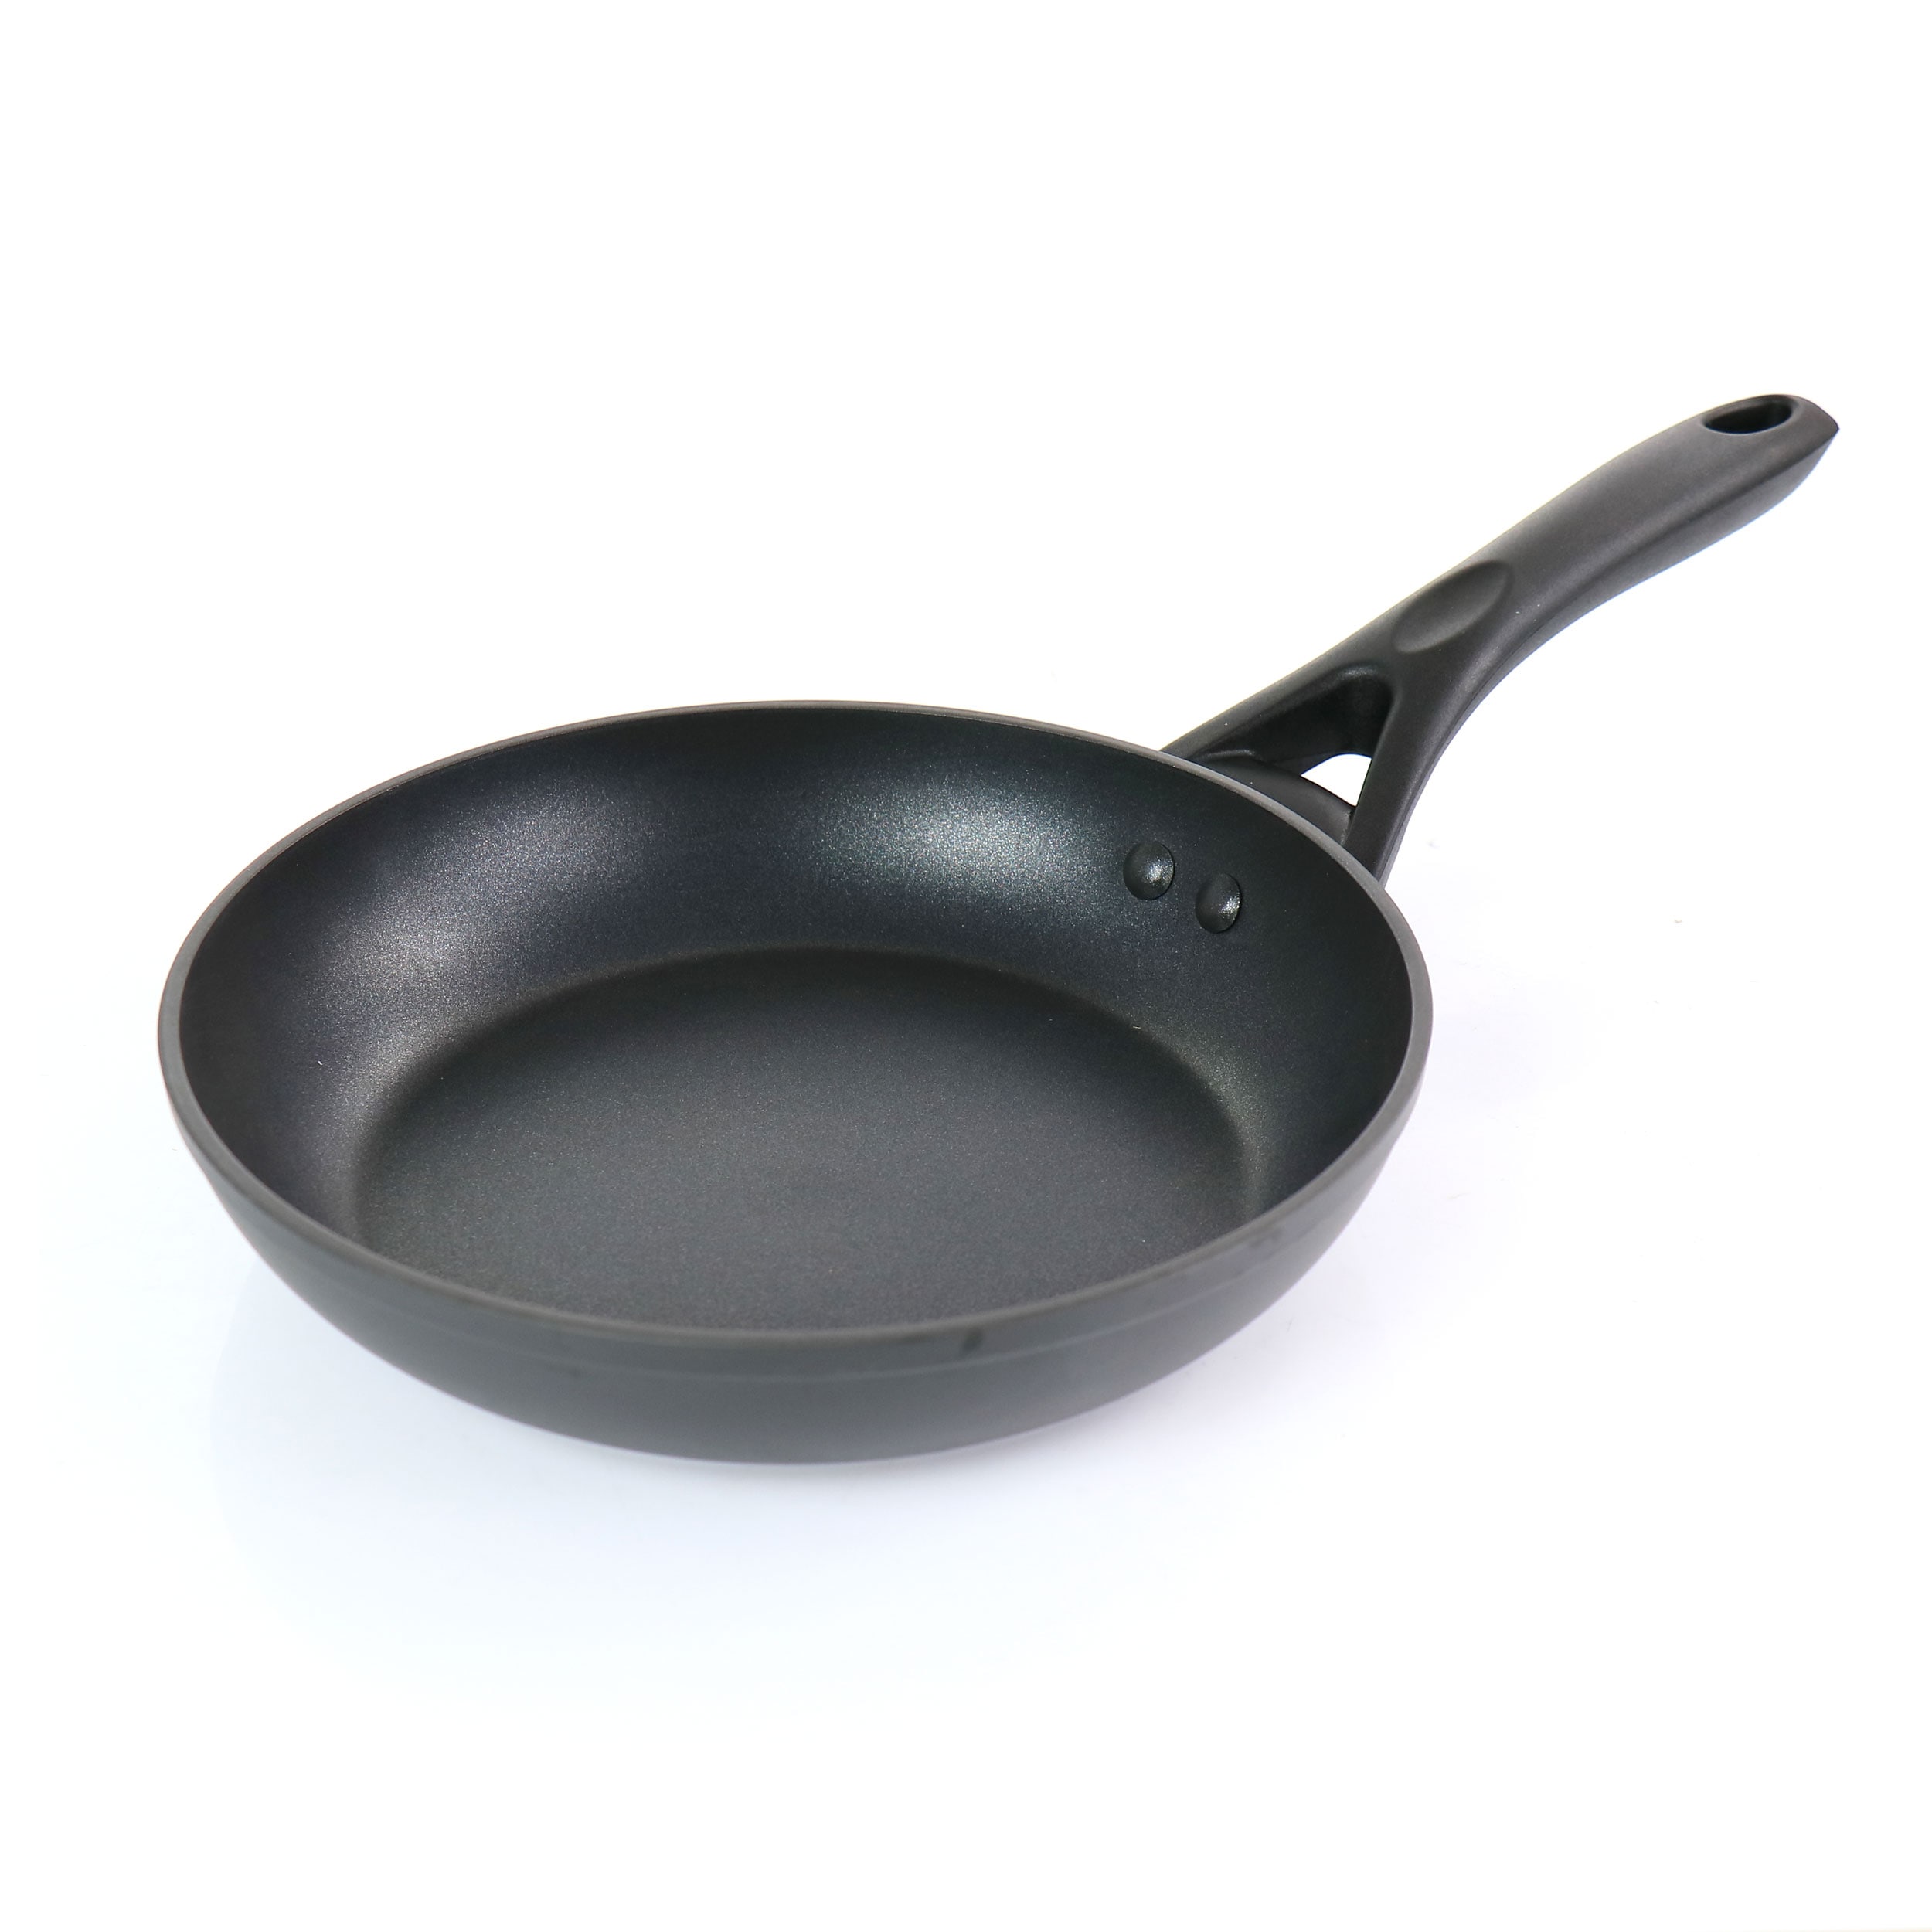 Oster 8 in. Nonstick Aluminum Frying Pan in Turquoise